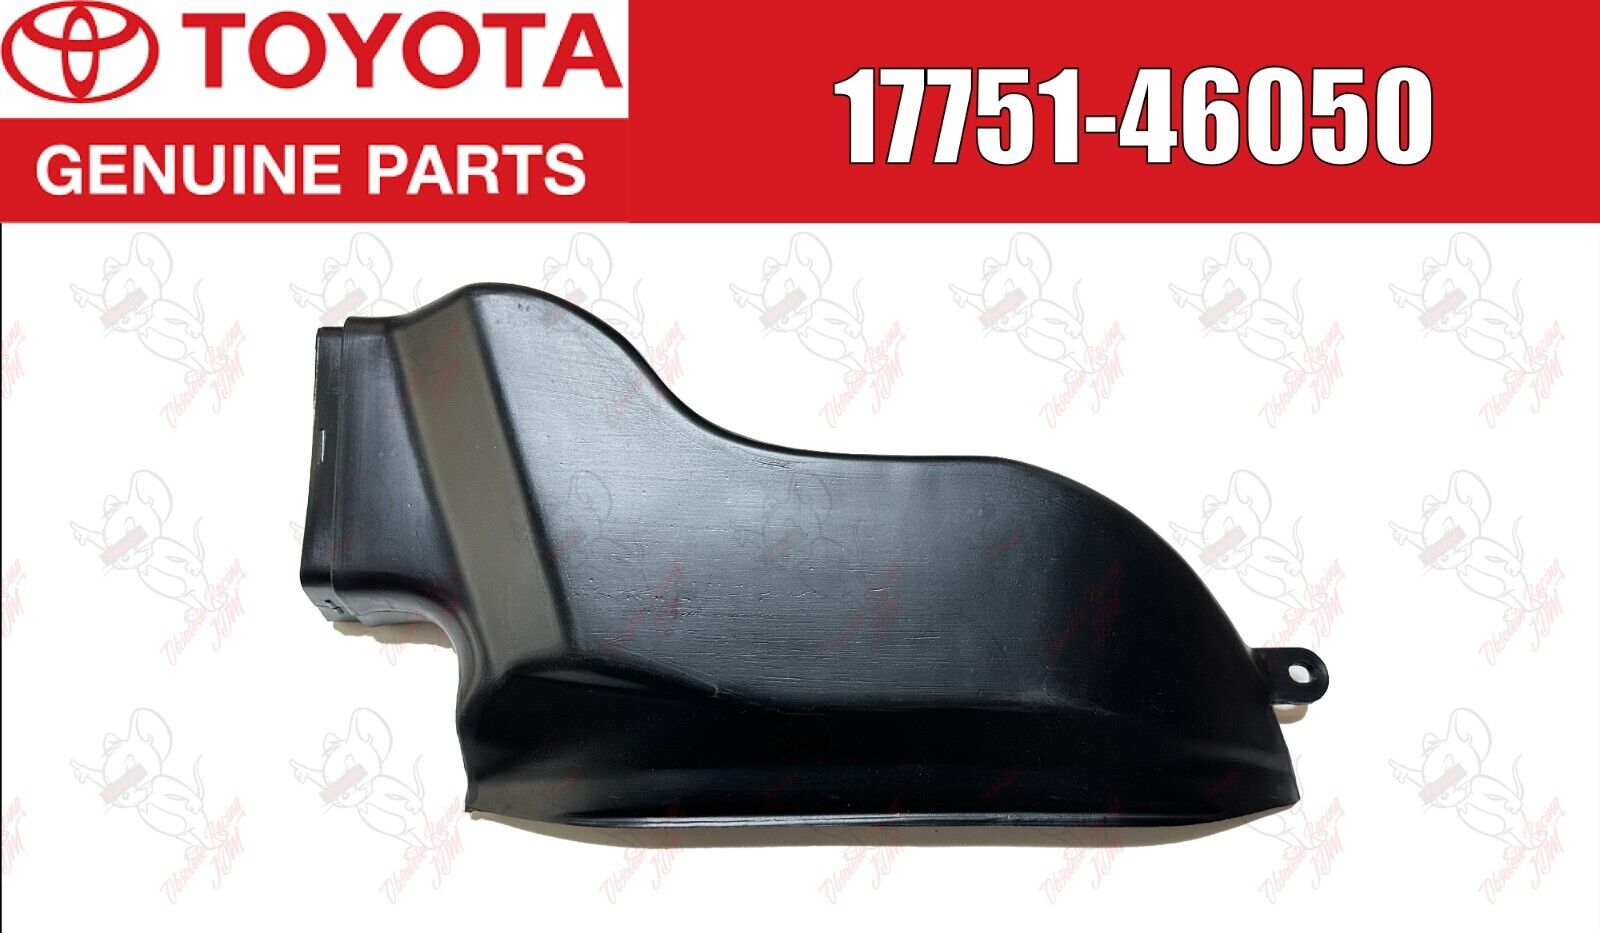 TOYOTA OEM Air Intake Inlet Cleaner Duct For 93-02 JZA80 SUPRA MK4 17751-46050